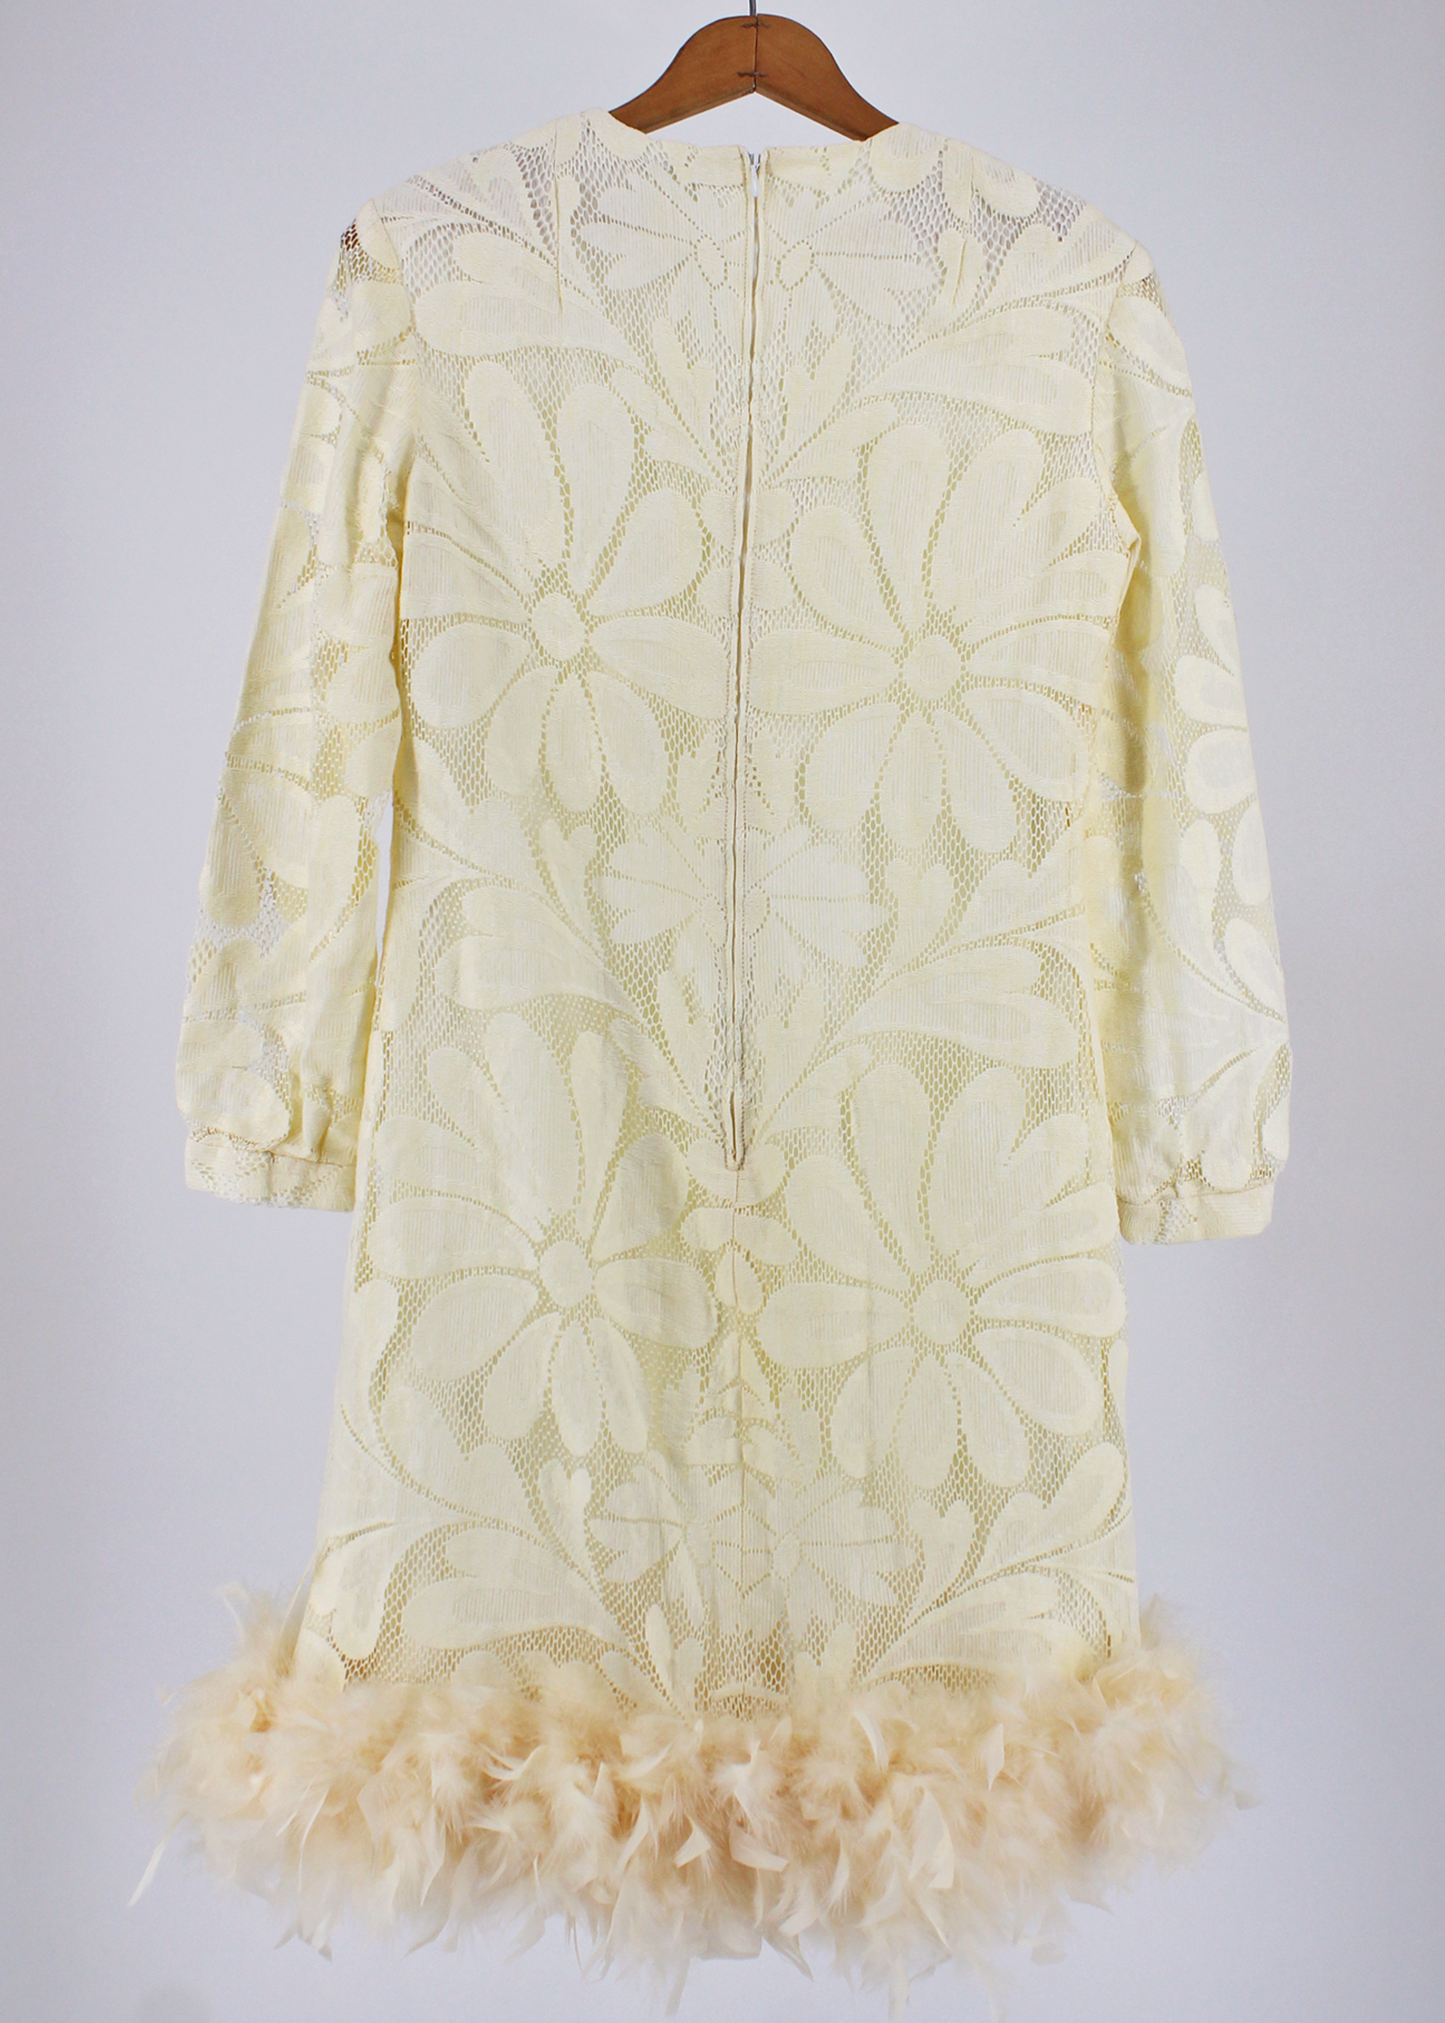 Beautiful 1970s ivory lace dress featuring an oversized daisy lace pattern, cuffed long sleeves, and a gorgeous sweep of ivory feathers at the bottom hem.